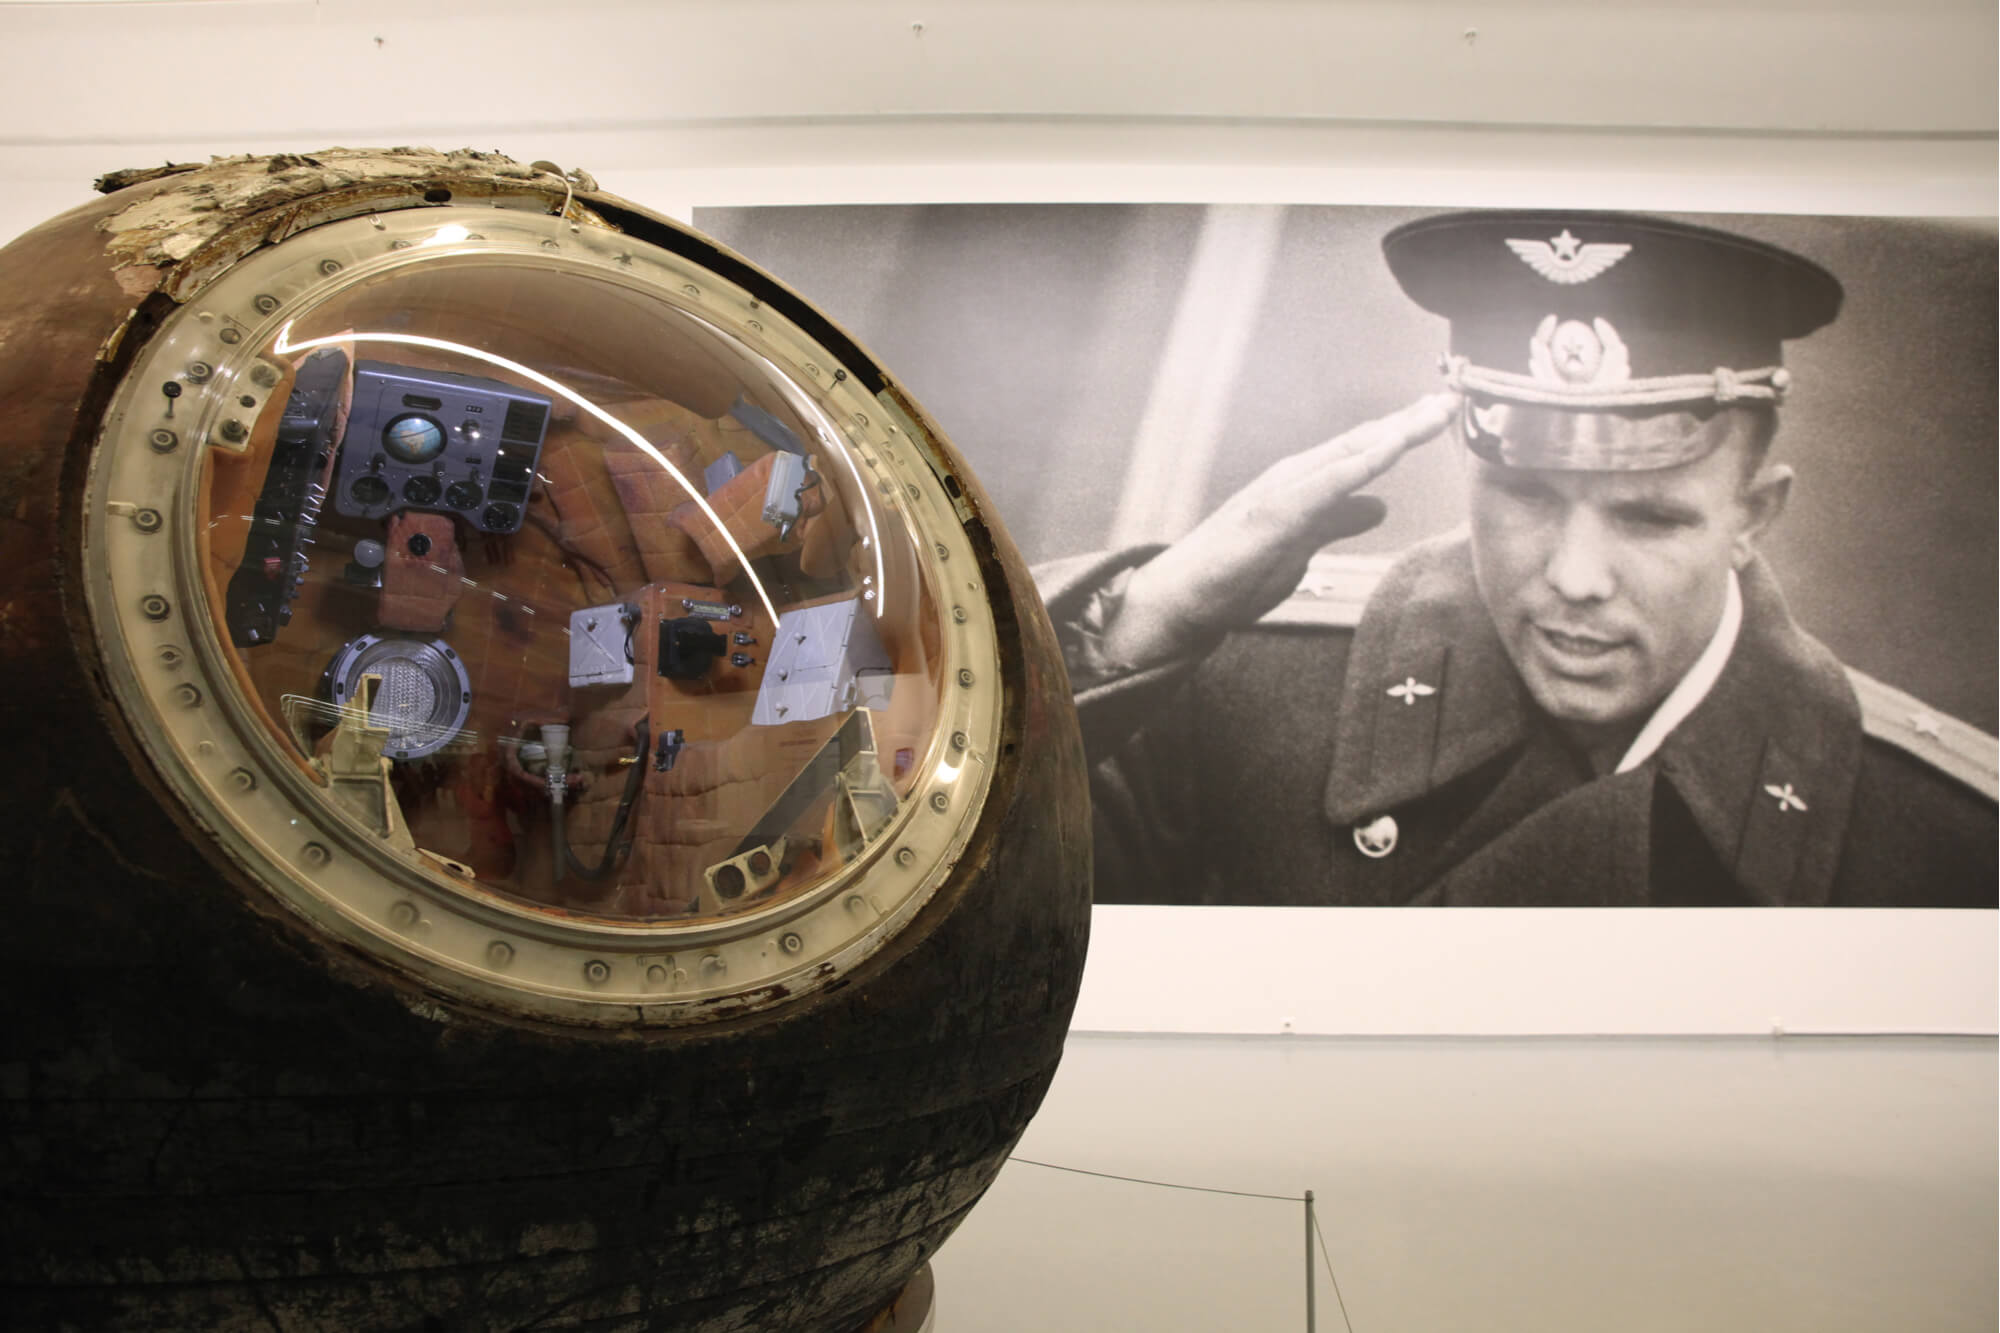 Sixty Years Ago Yuri Gagarin Became The First Human In Space Aerotime